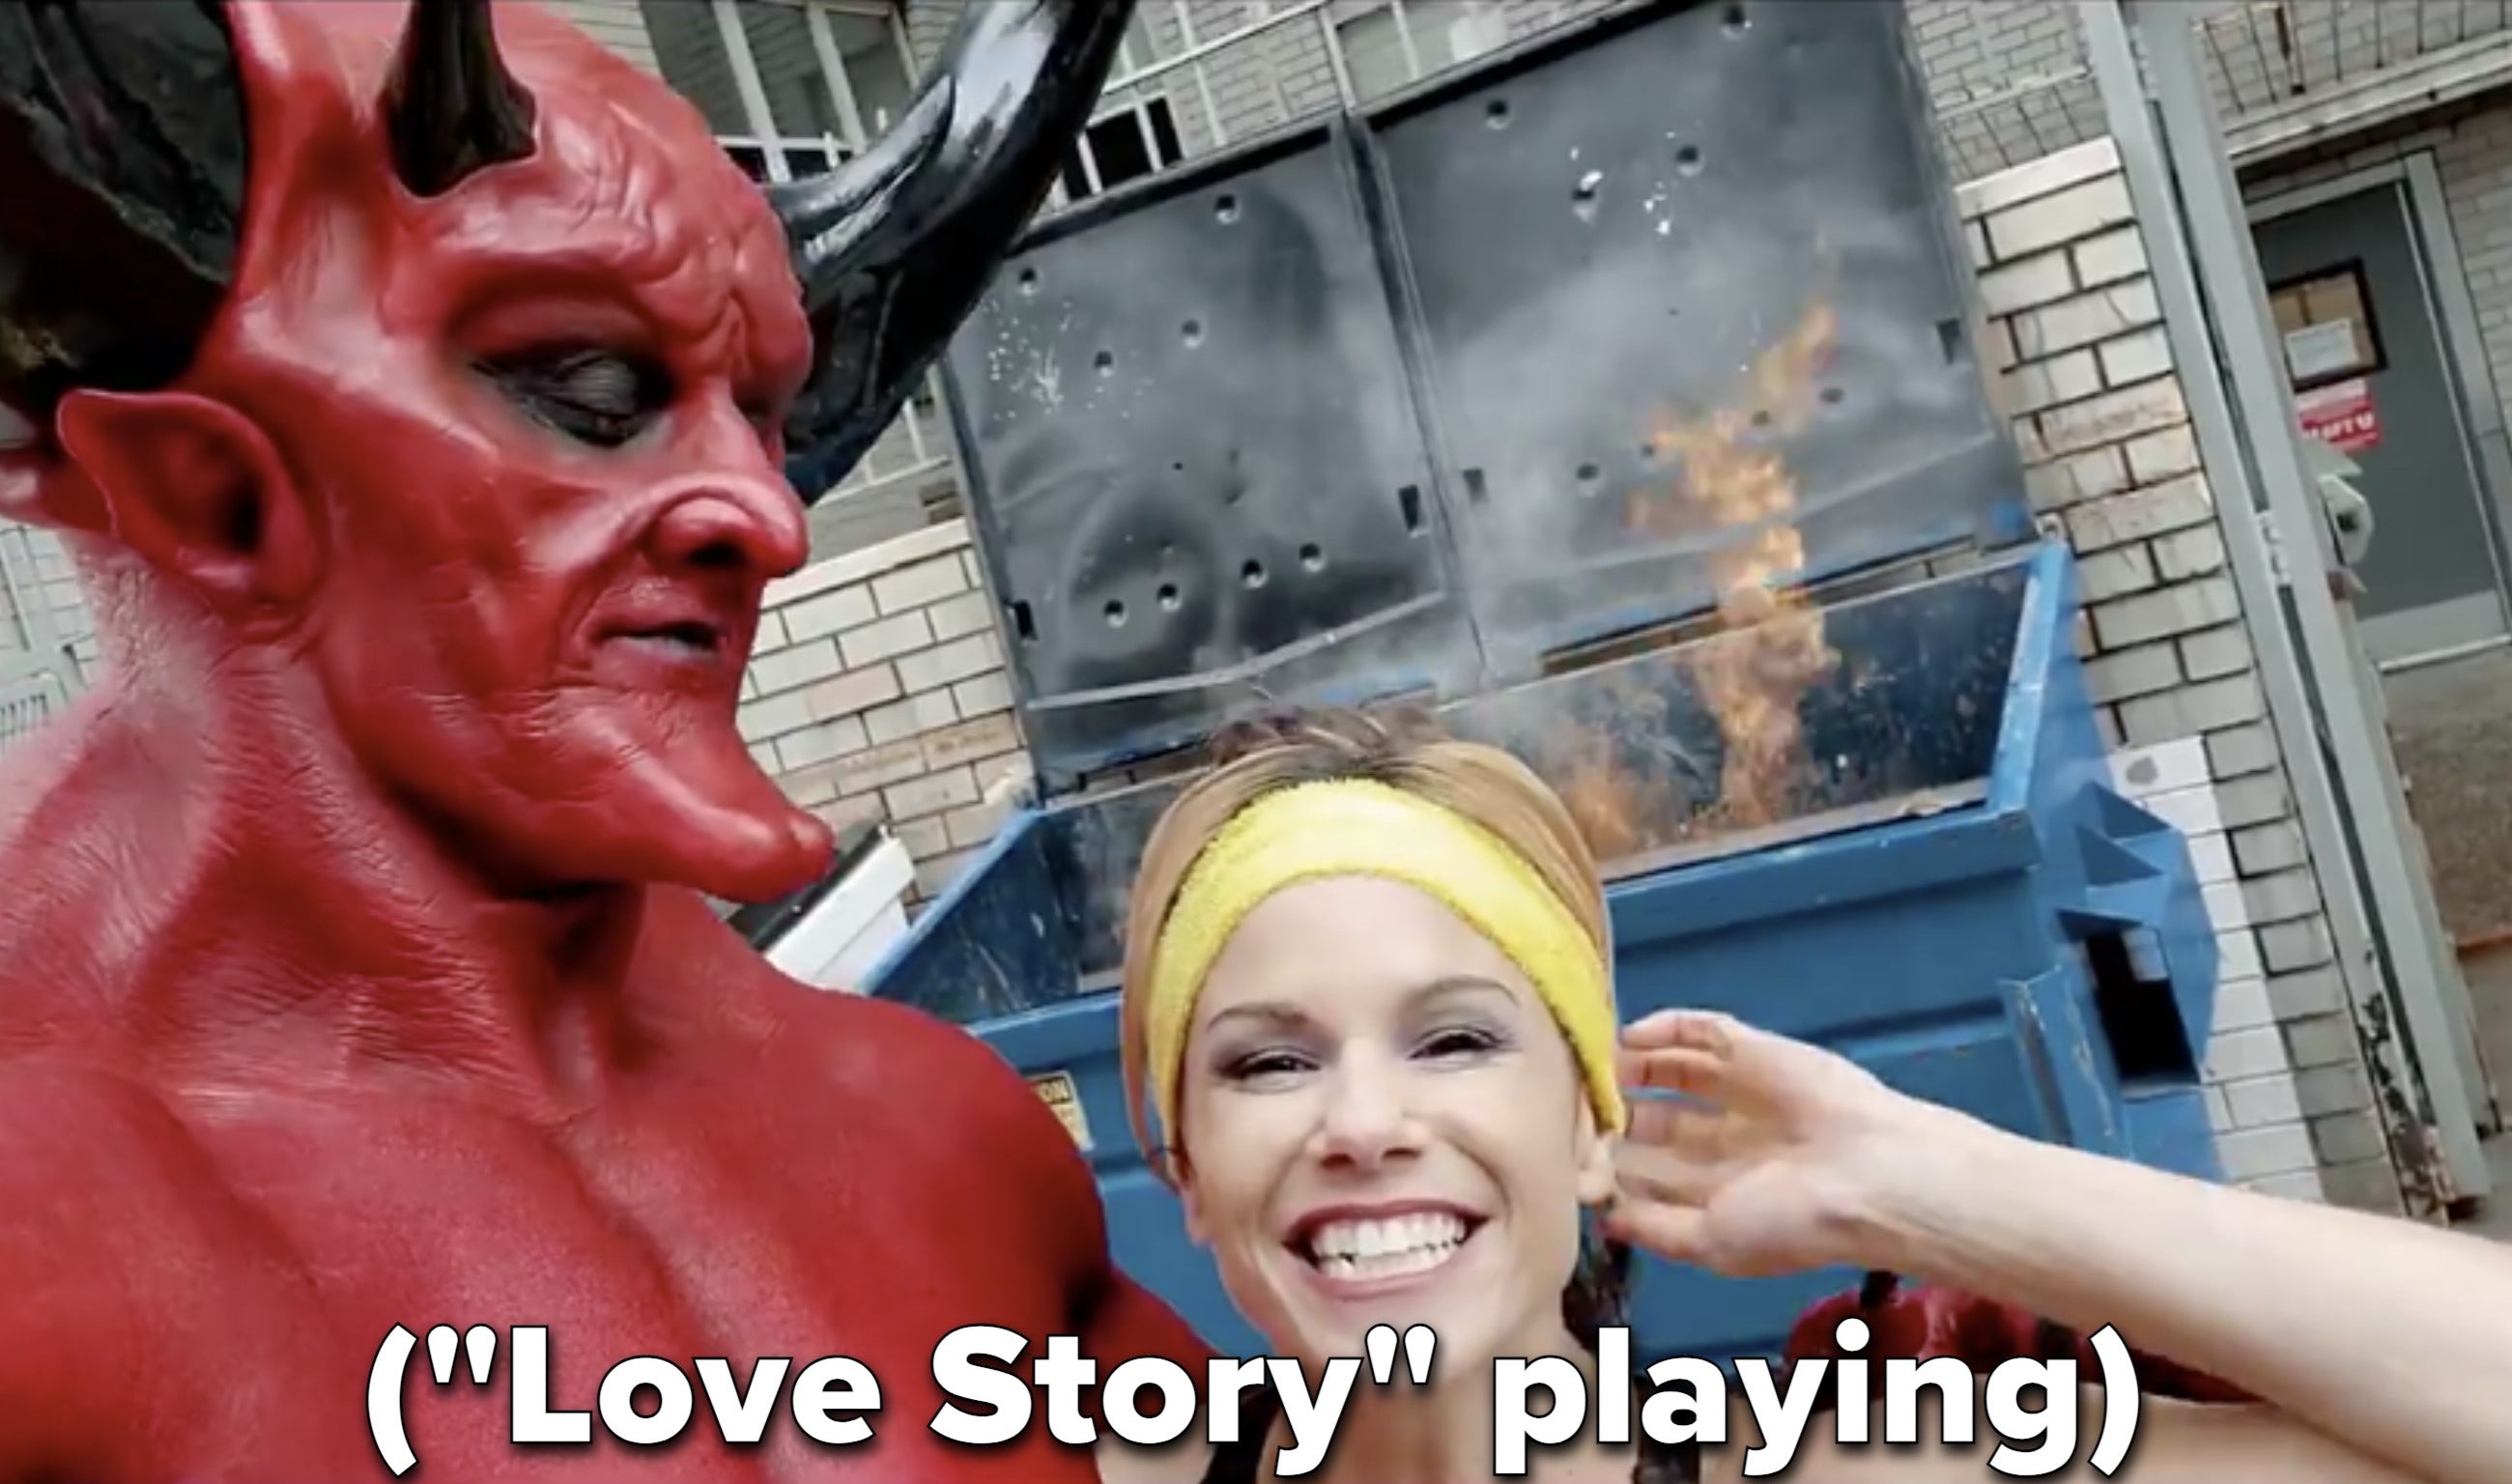 The Devil and 2020 pose in front of a dumpster fire while &quot;Love Story&quot; plays